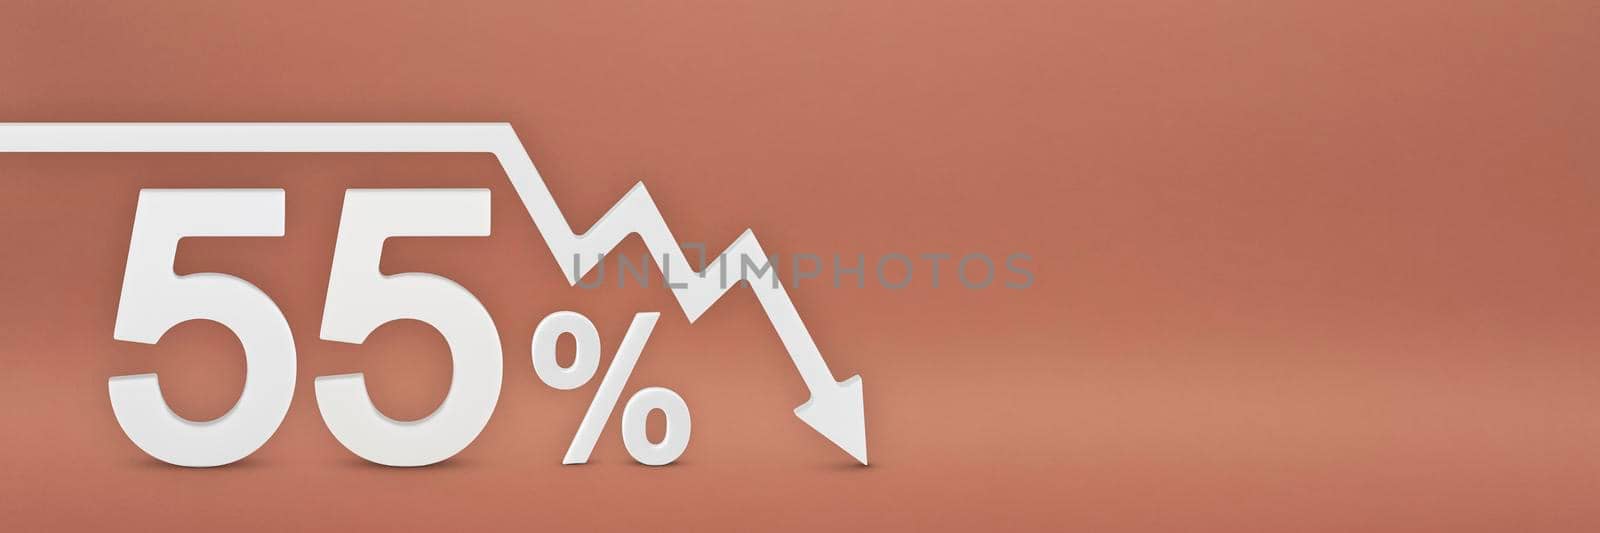 fifty-five percent, the arrow on the graph is pointing down. Stock market crash, bear market, inflation.Economic collapse, collapse of stocks.3d banner,55 percent discount sign on a red background